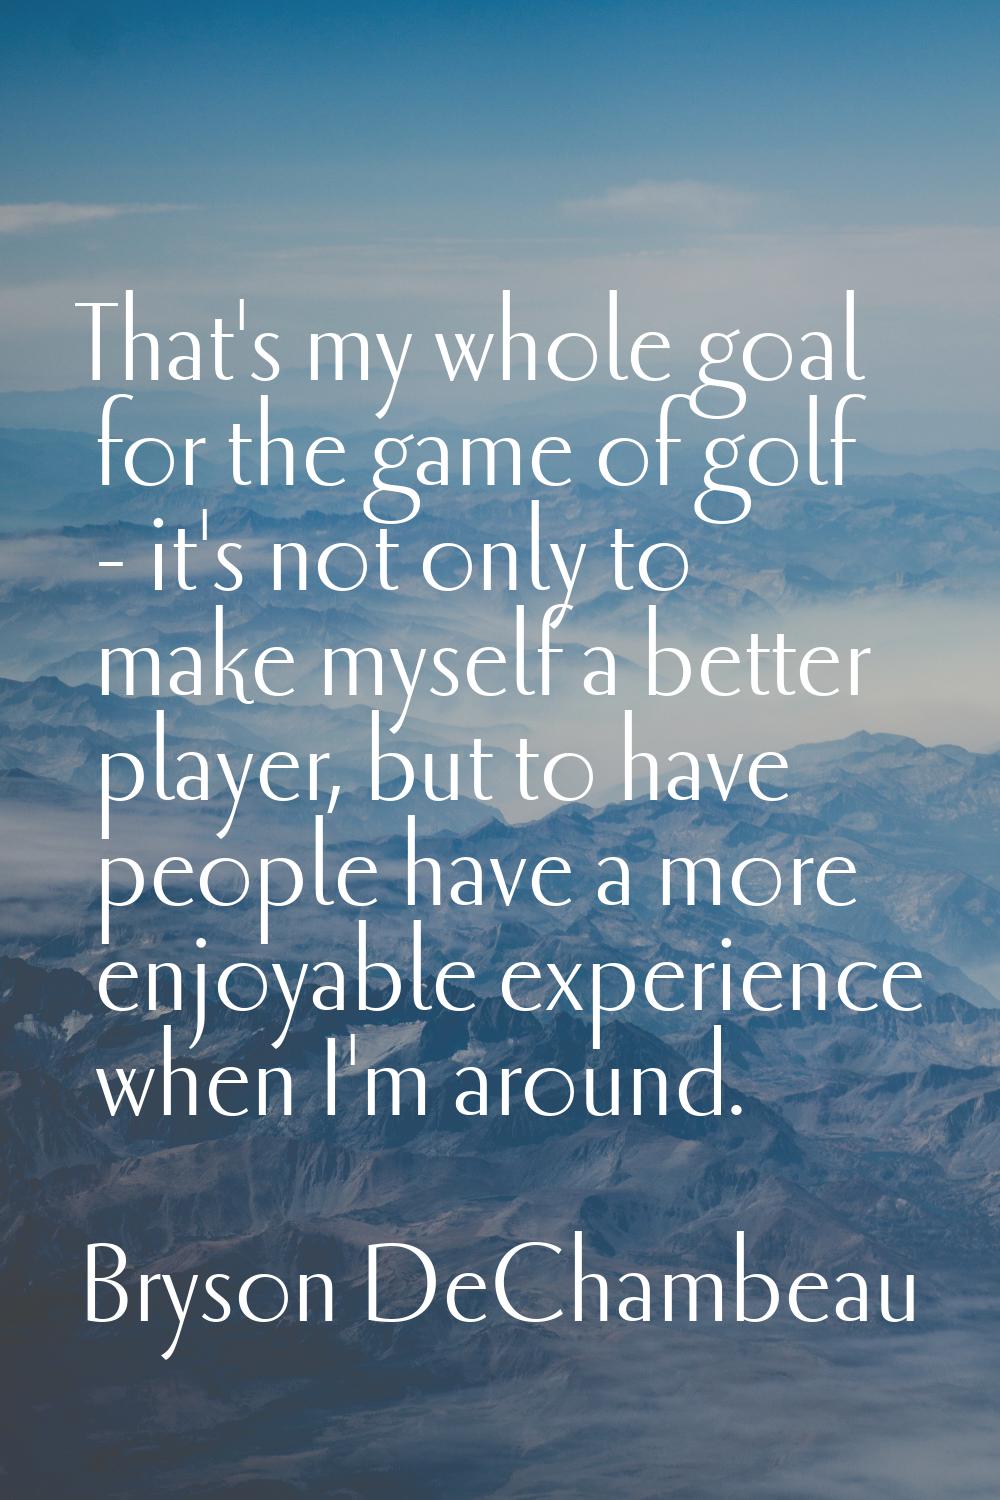 That's my whole goal for the game of golf - it's not only to make myself a better player, but to ha